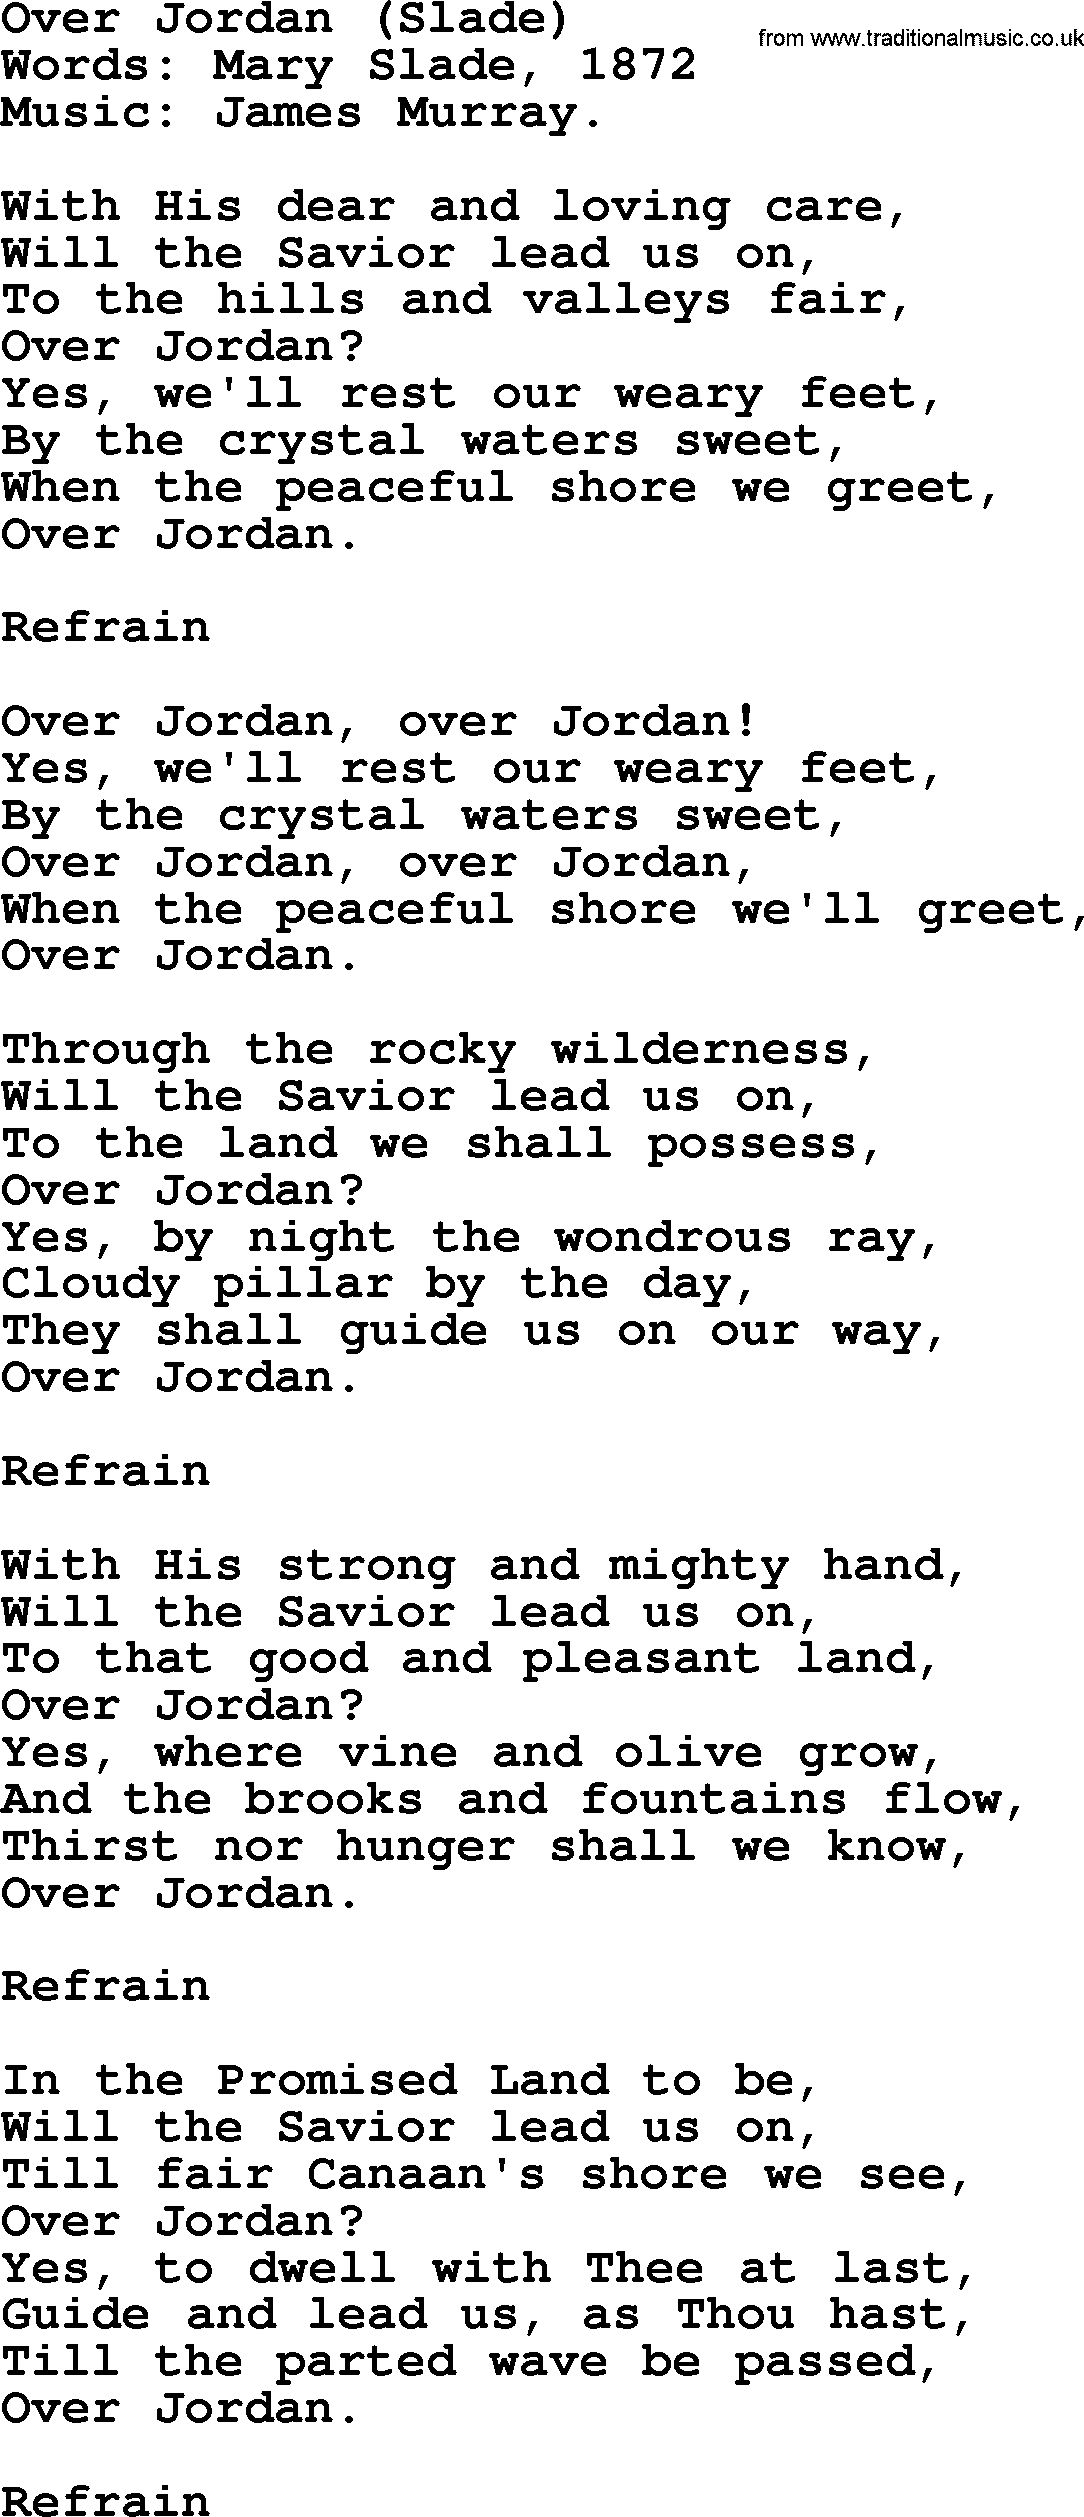 Songs and Hymns about Heaven: Over Jordan (slade) lyrics with PDF